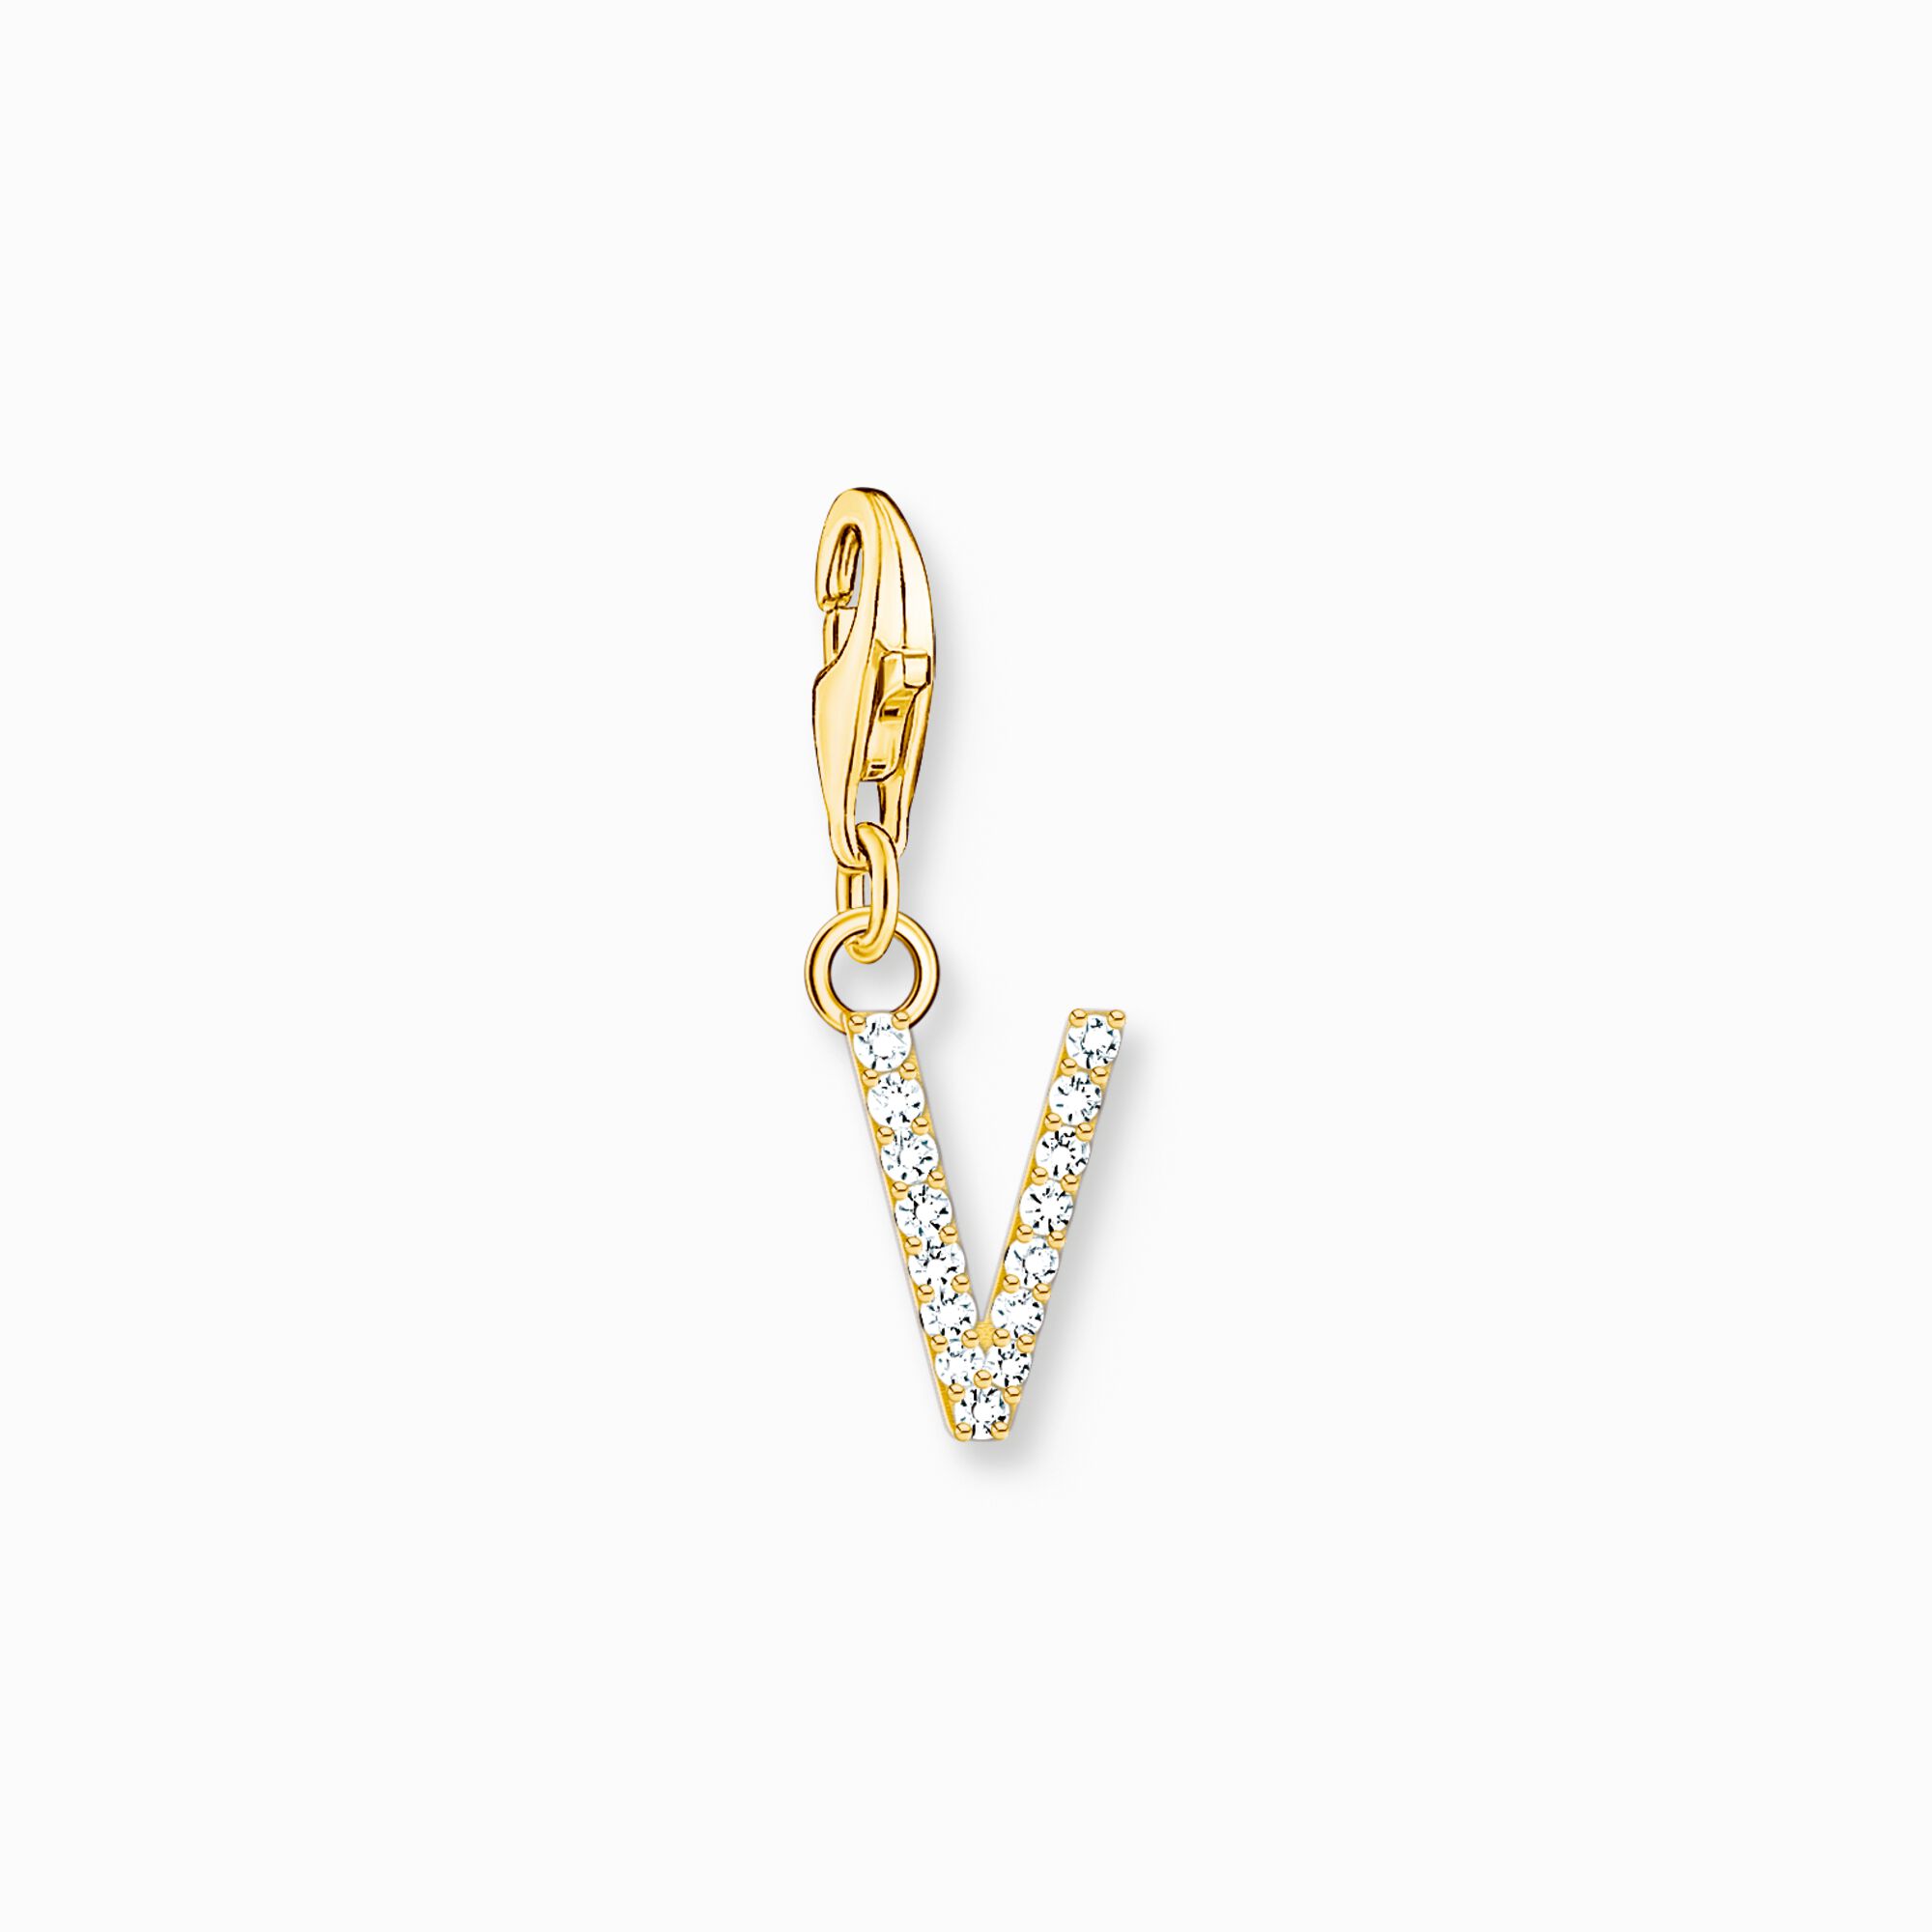 Charm pendant letter V with white stones gold plated from the Charm Club collection in the THOMAS SABO online store